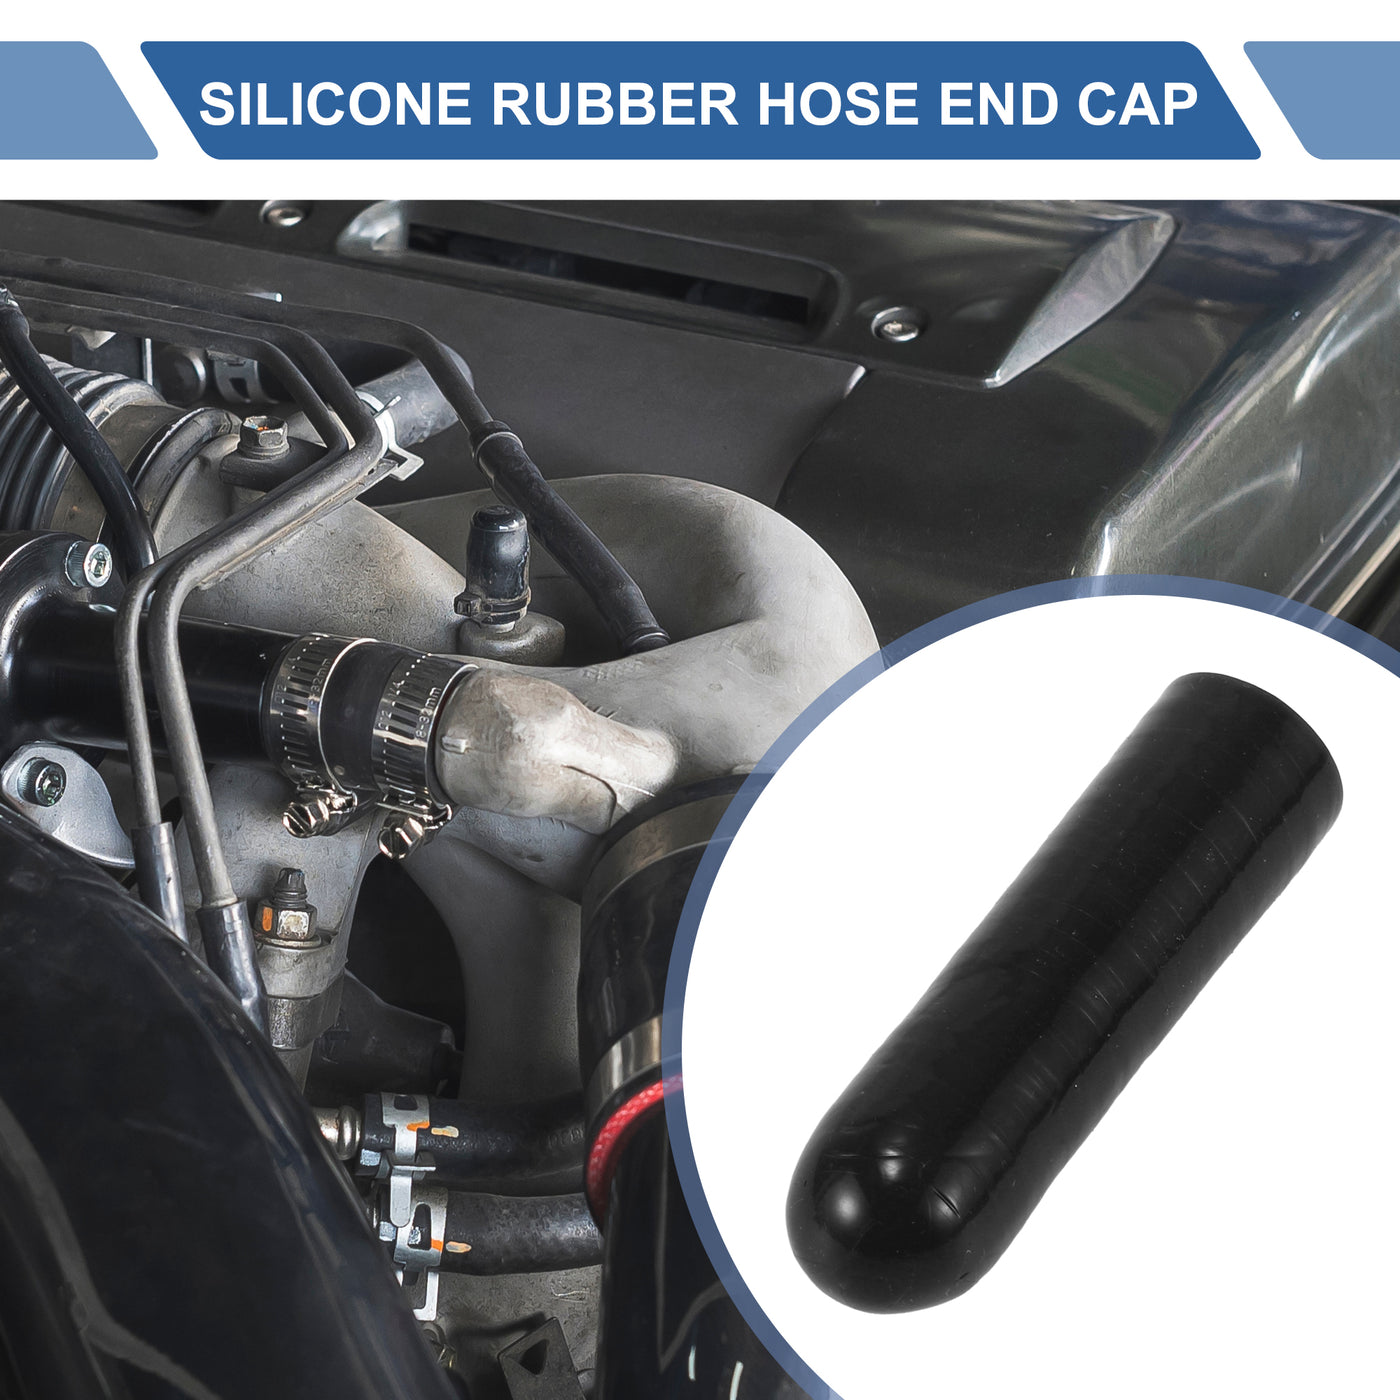 X AUTOHAUX 1 Pcs 60mm Length 12mm/0.47" ID Black Car Silicone Rubber Hose End Cap with Clamp Silicone Reinforced Blanking Cap for Bypass Tube Universal